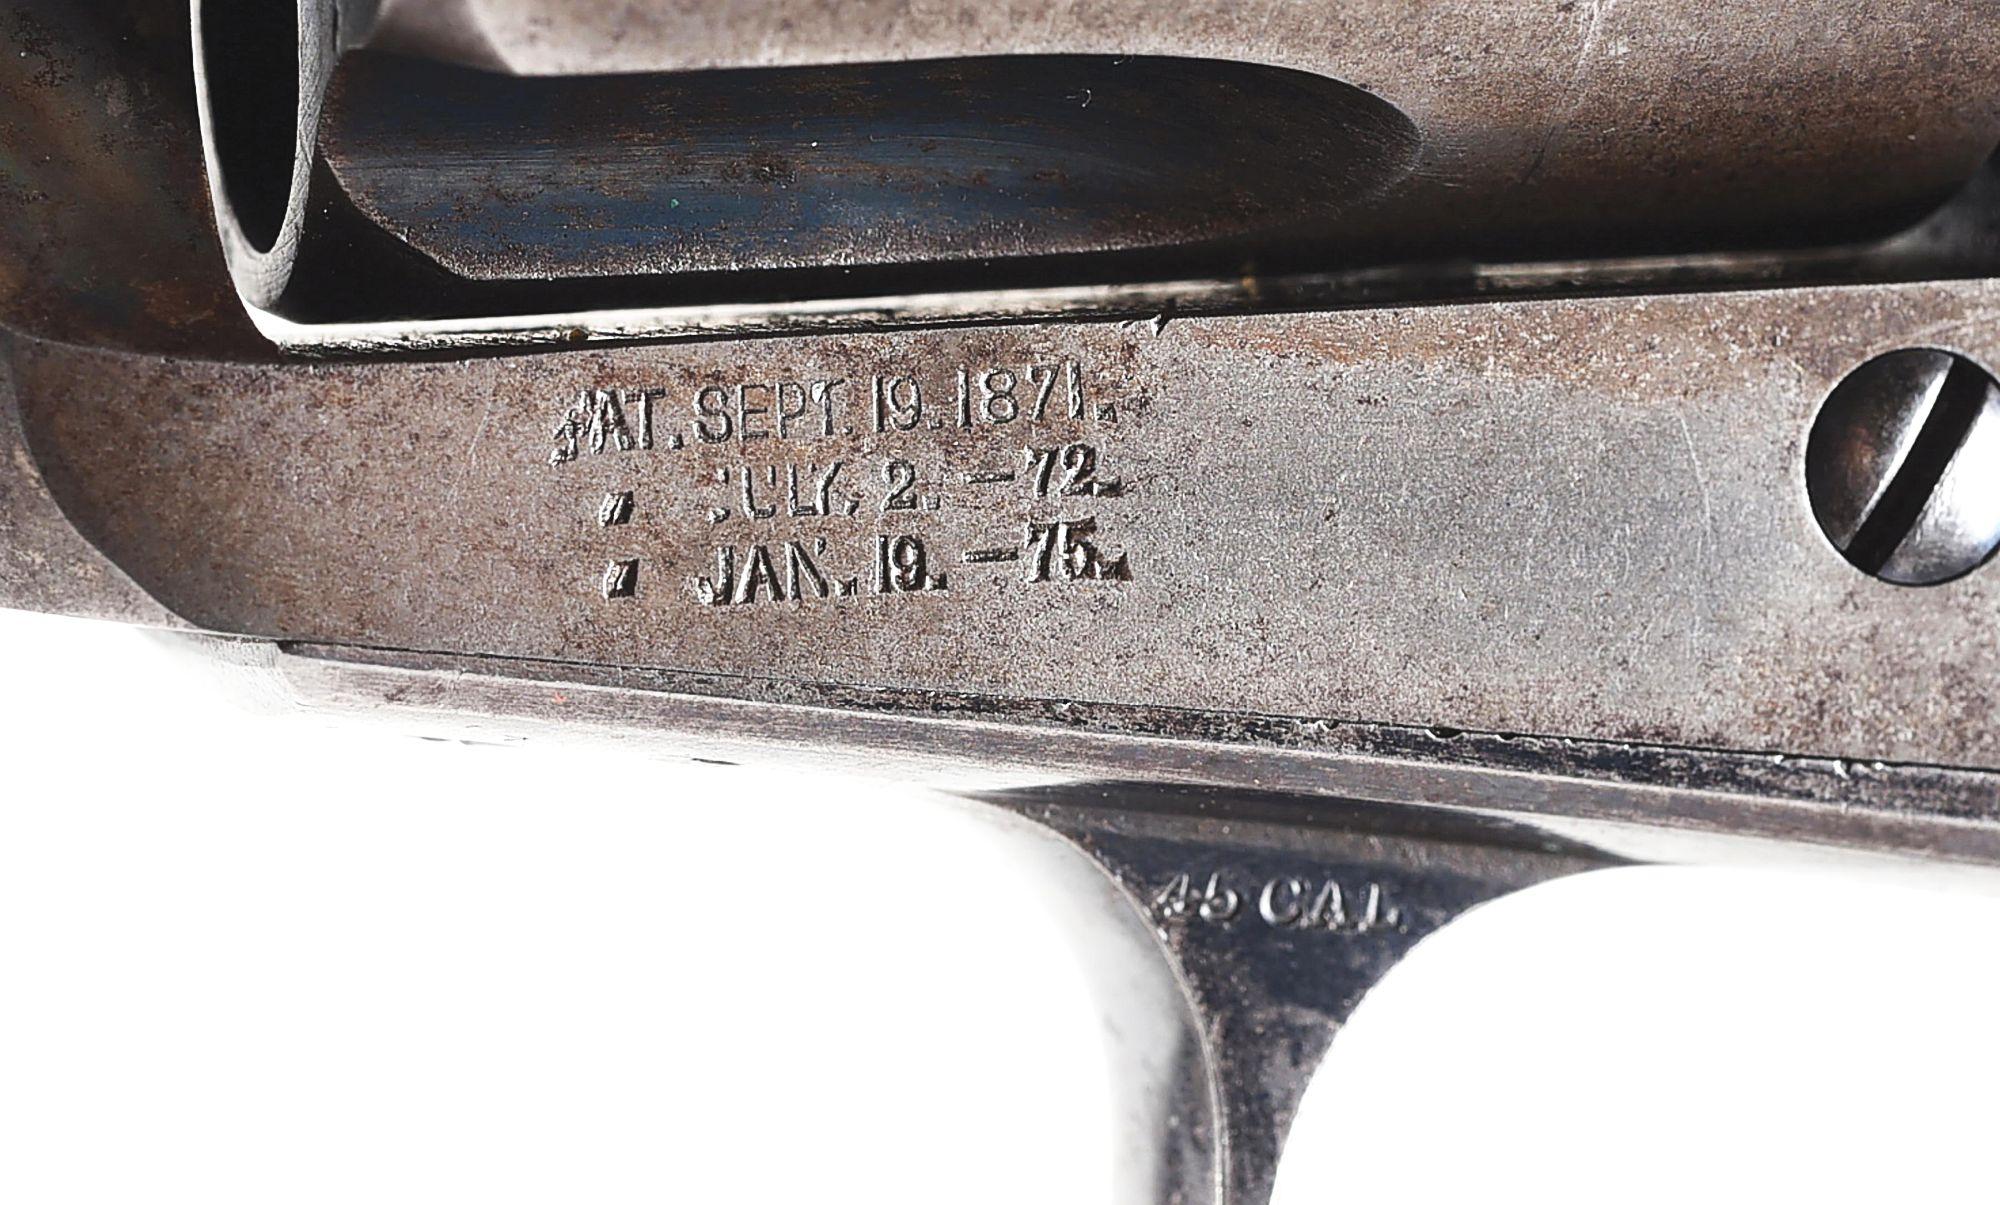 (A) COLT SINGLE ACTION ARMY REVOLVER IN CASE.